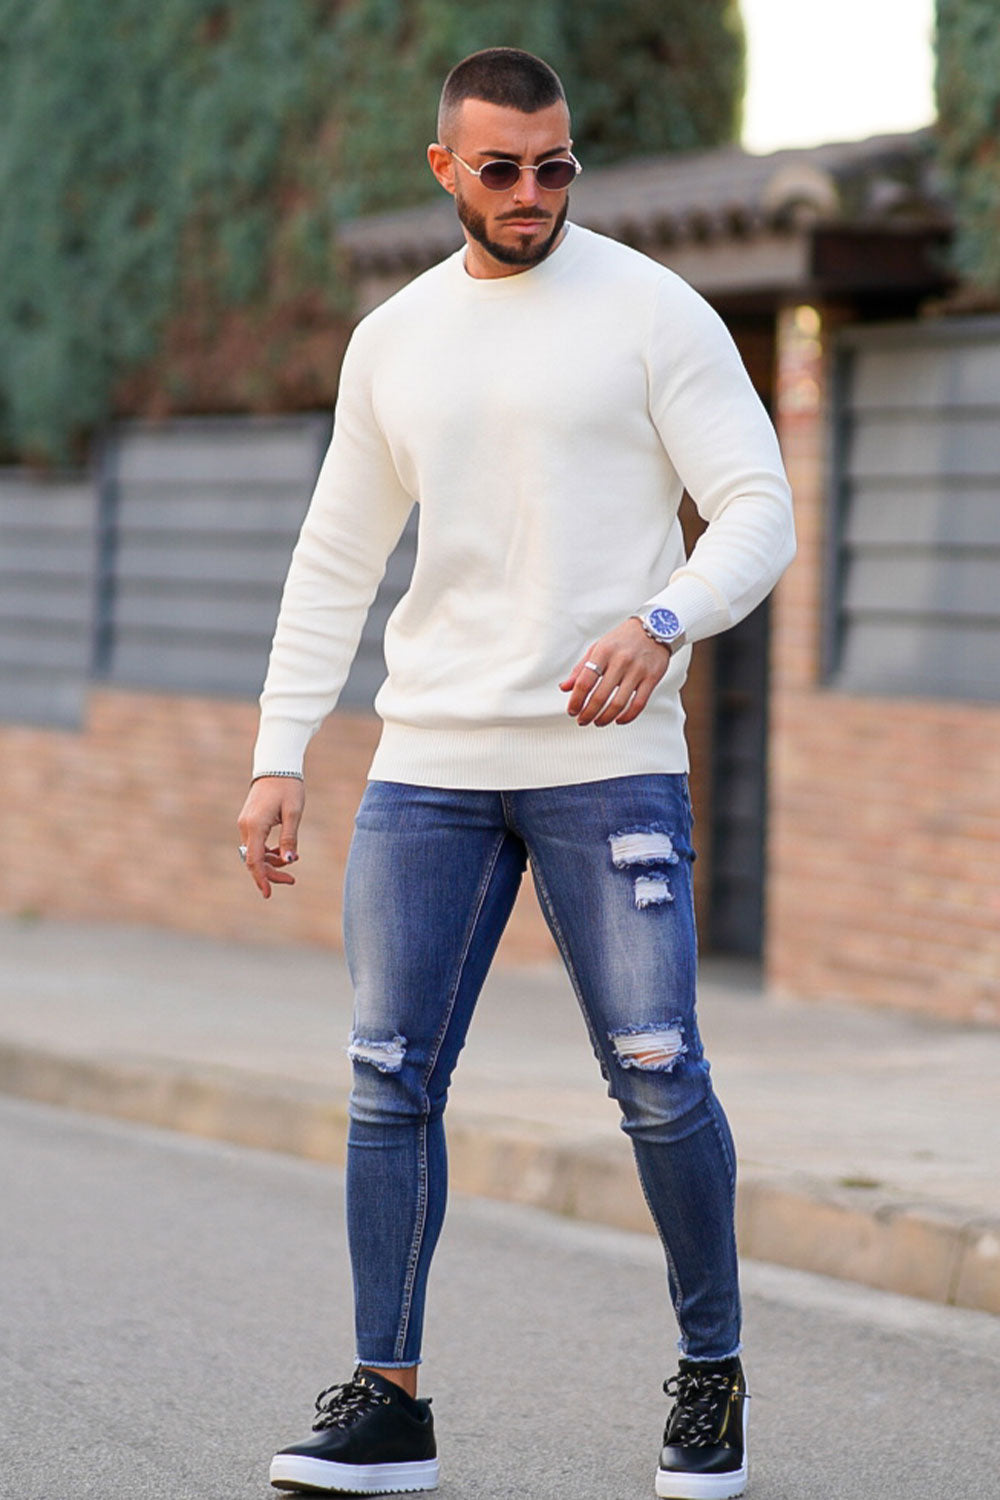 Gingtto Men's Round Neck Sweaters: Comfort And Style Redefined